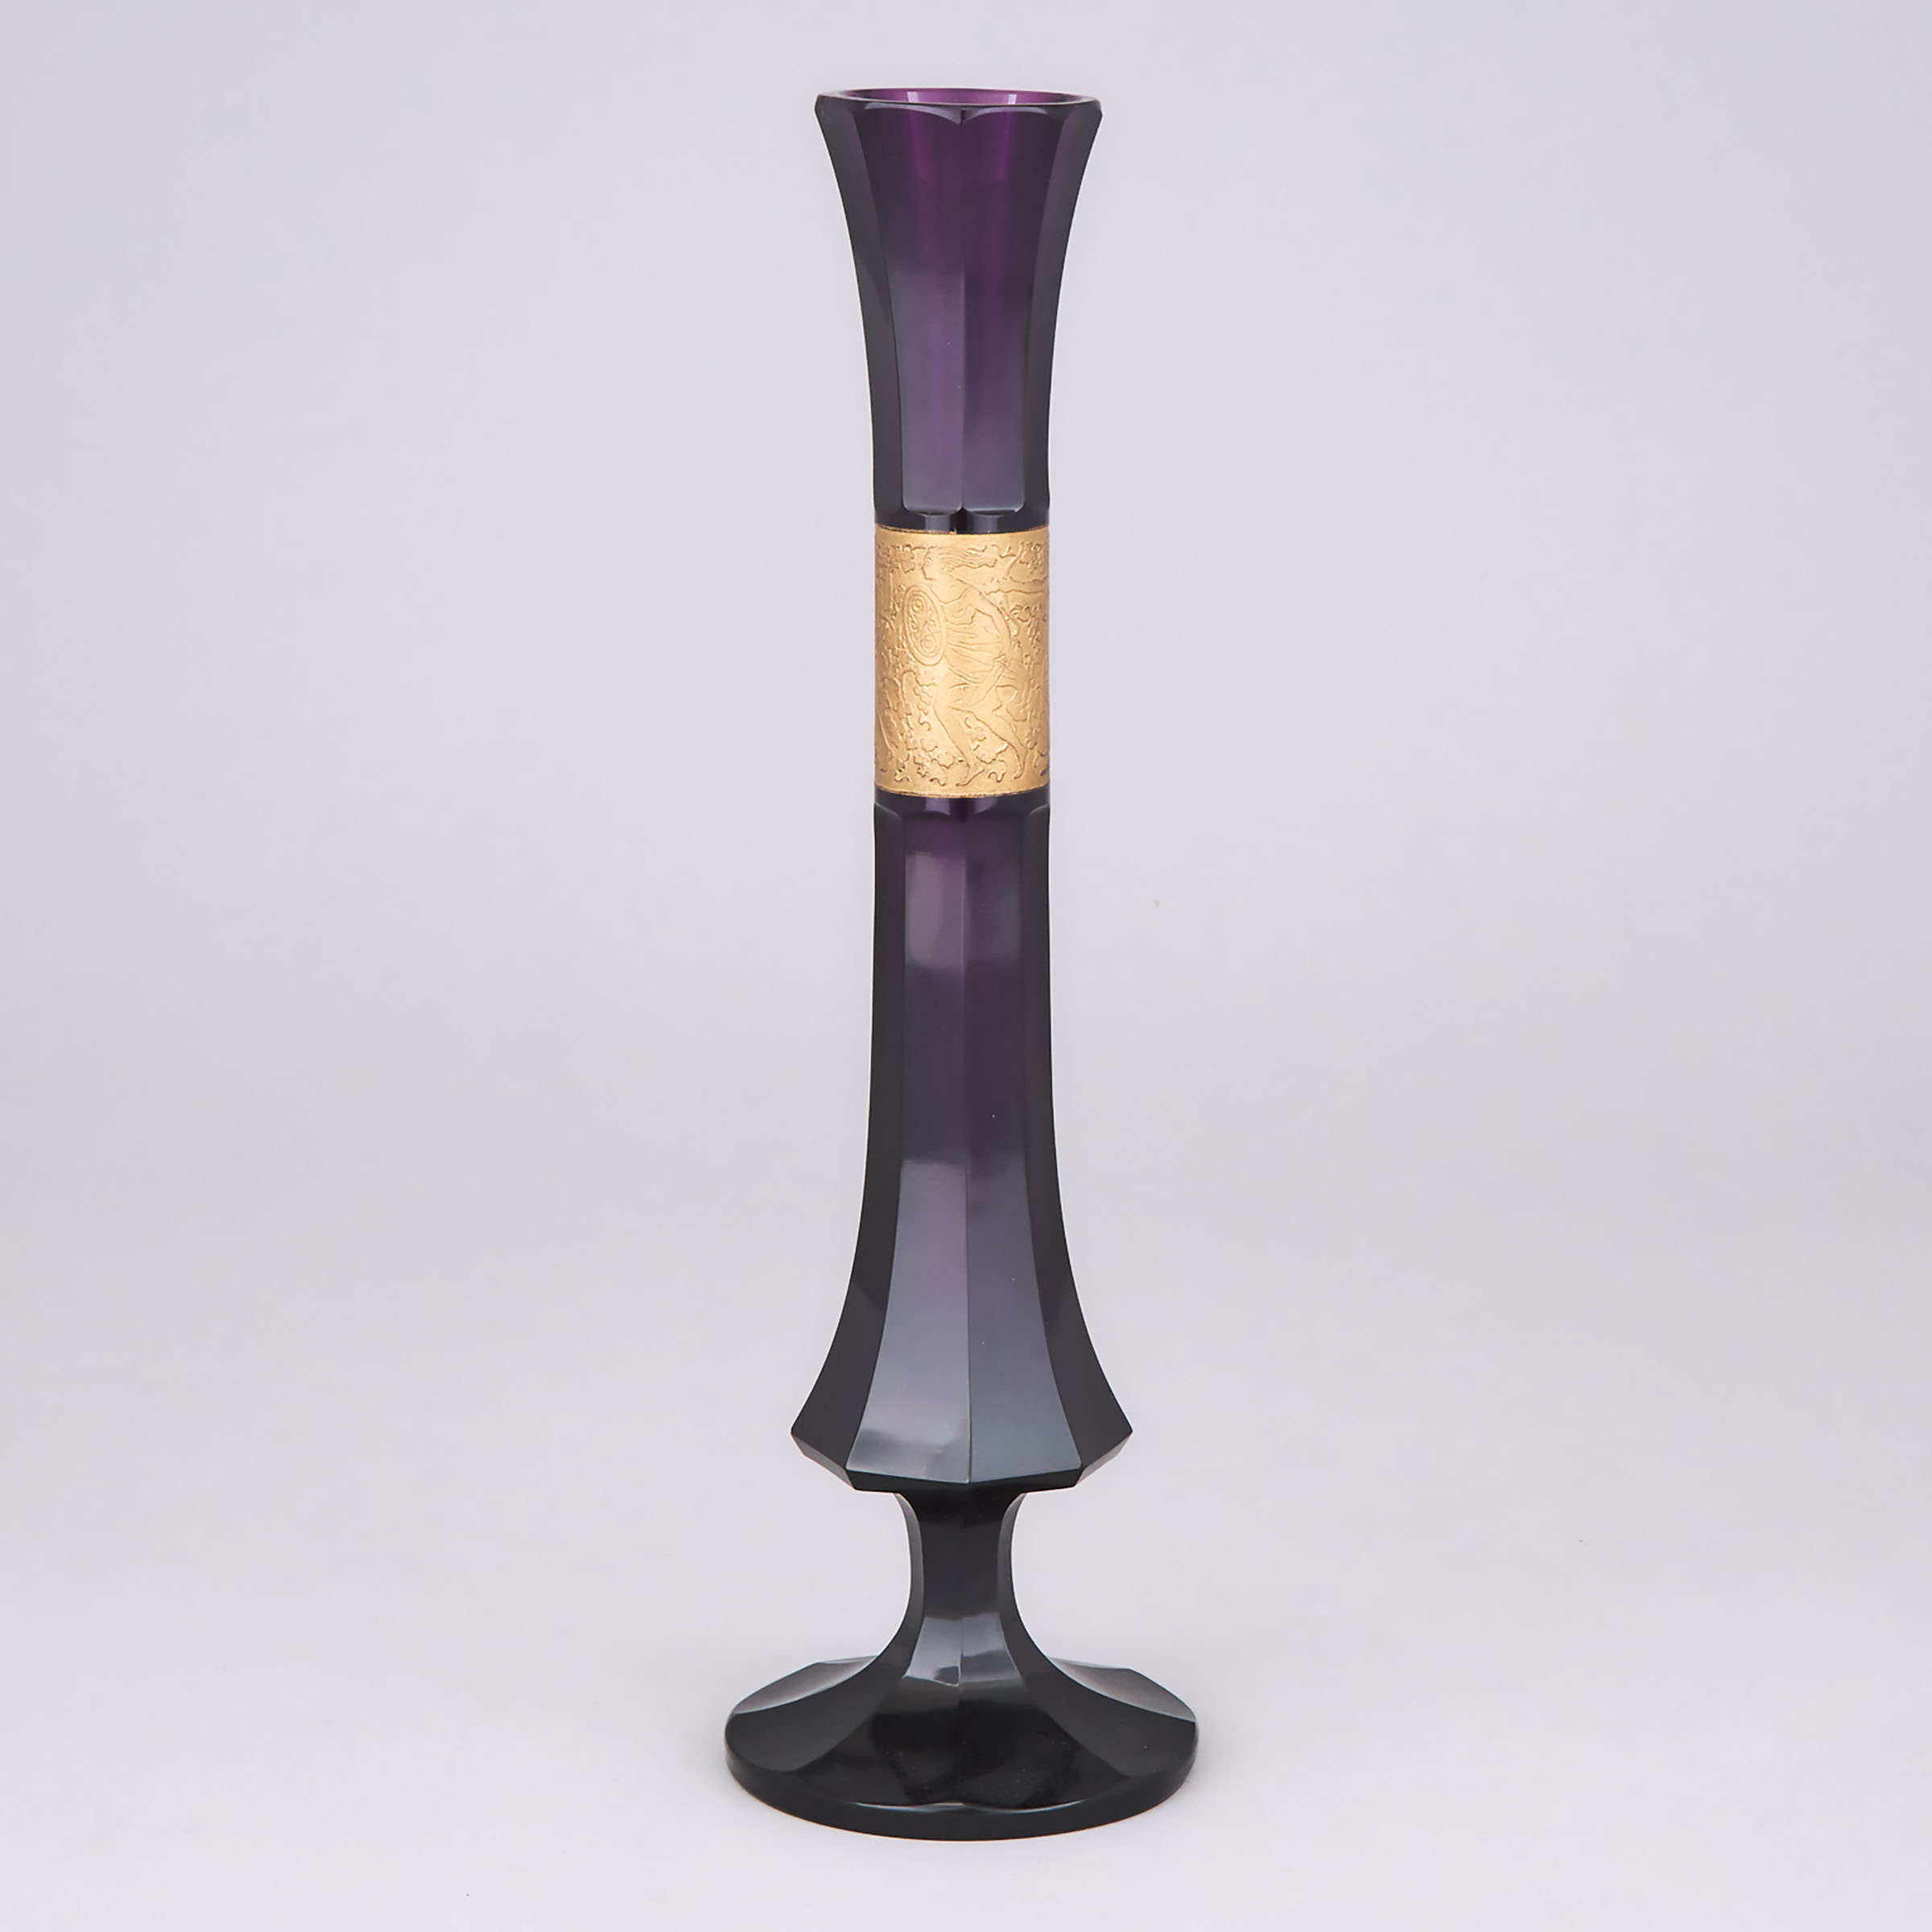 Moser Etched and Gilt Cut Amethyst Glass Vase, early 20th century